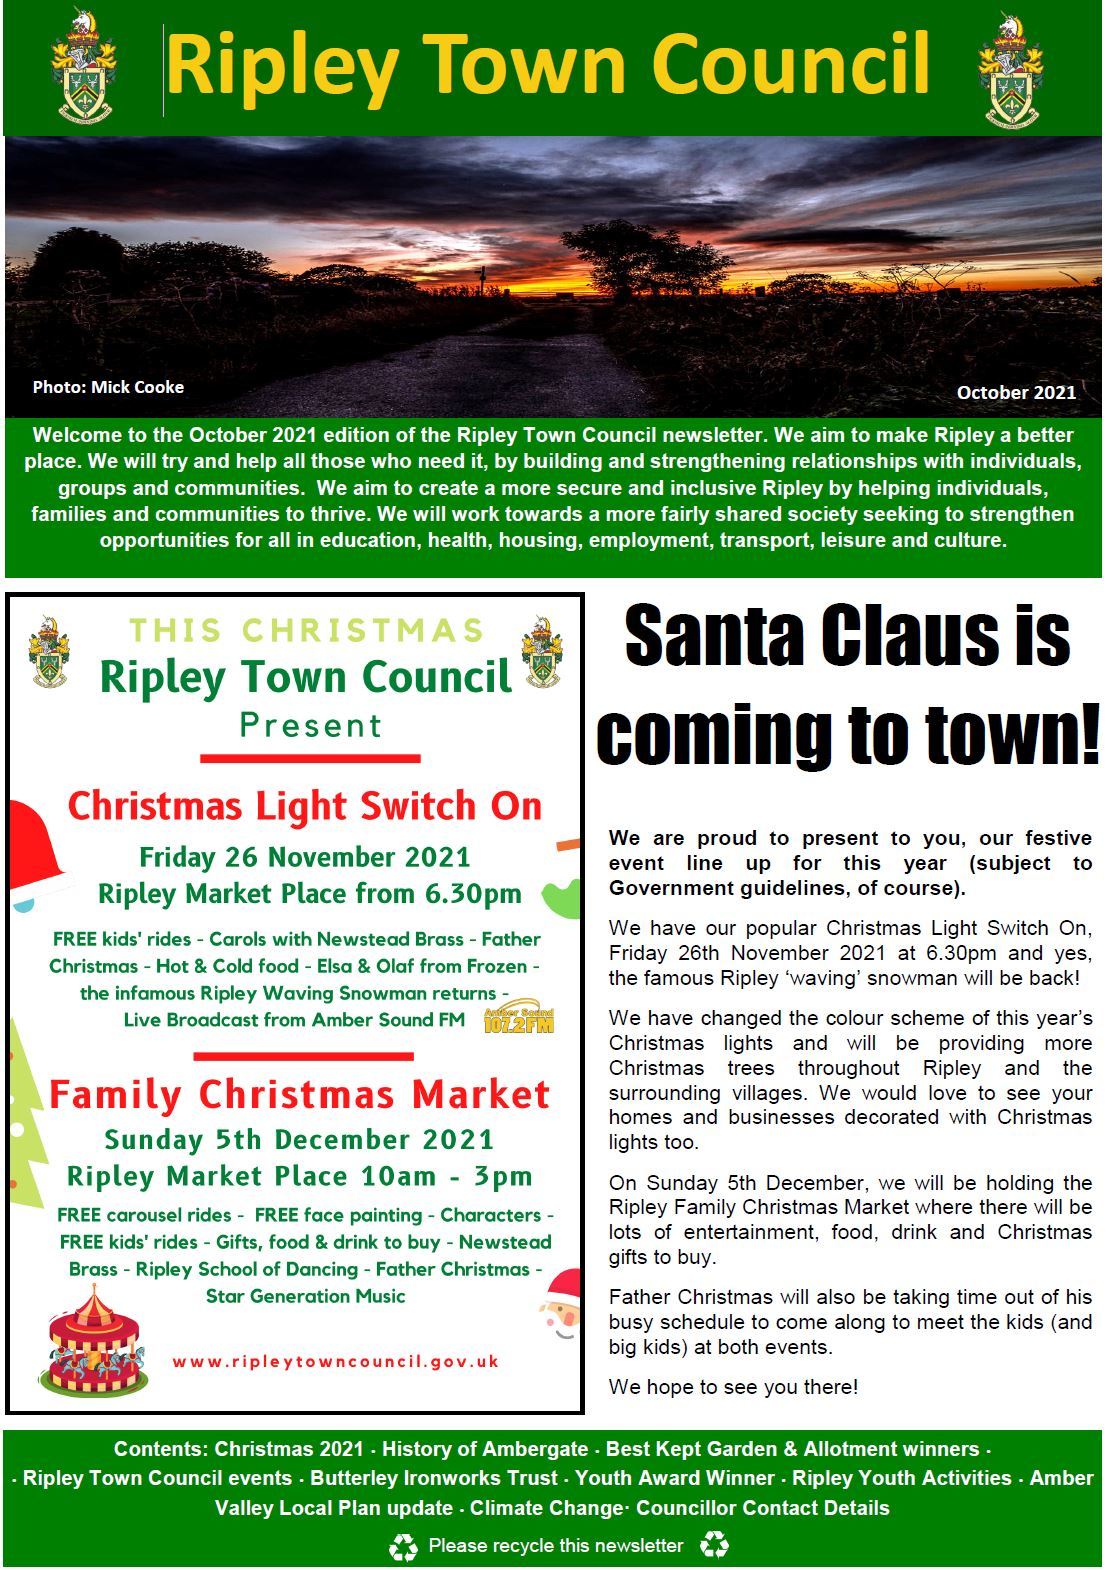 Ripley Town Council October newsletter front cover. Image of a sunset with trees and text about the Christmas events in Ripley.